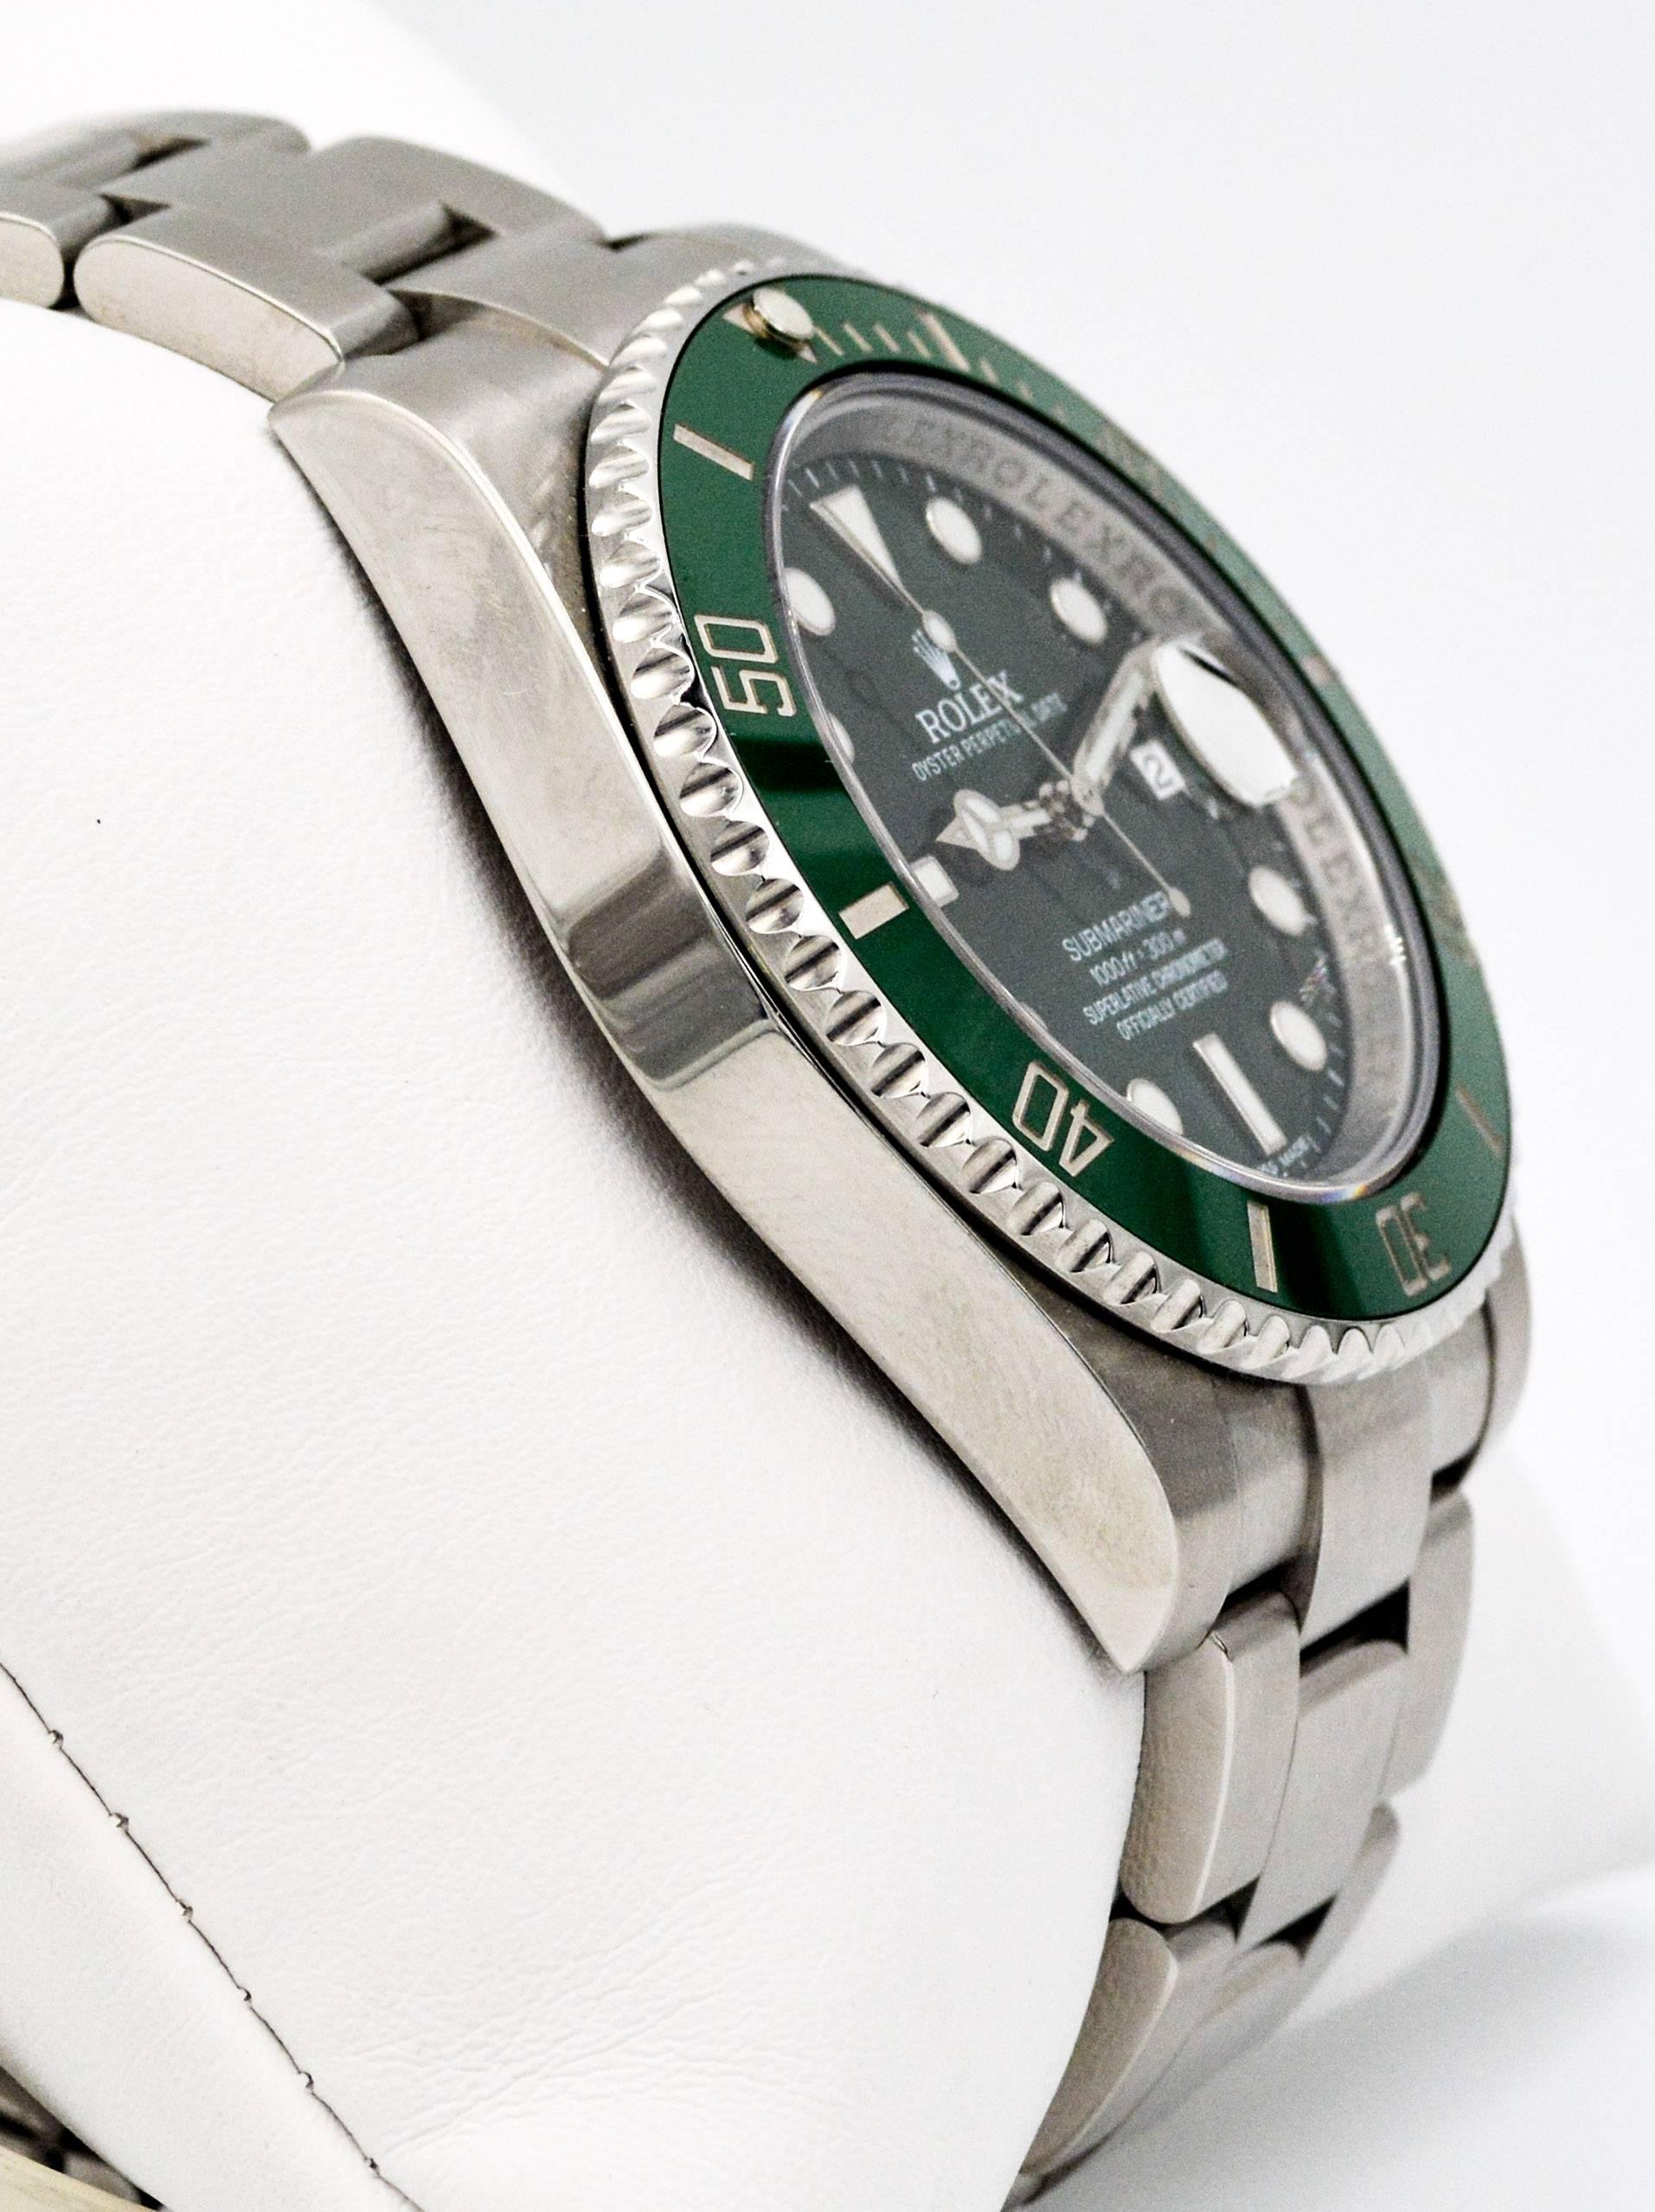 This certified Pre-Owned Rolex Submariner has a 40 mm case, Stainless steel bracelet, green dial with white dial indices, green rotating bezel, and a sapphire crystal.  This roles is model # 116610LV.